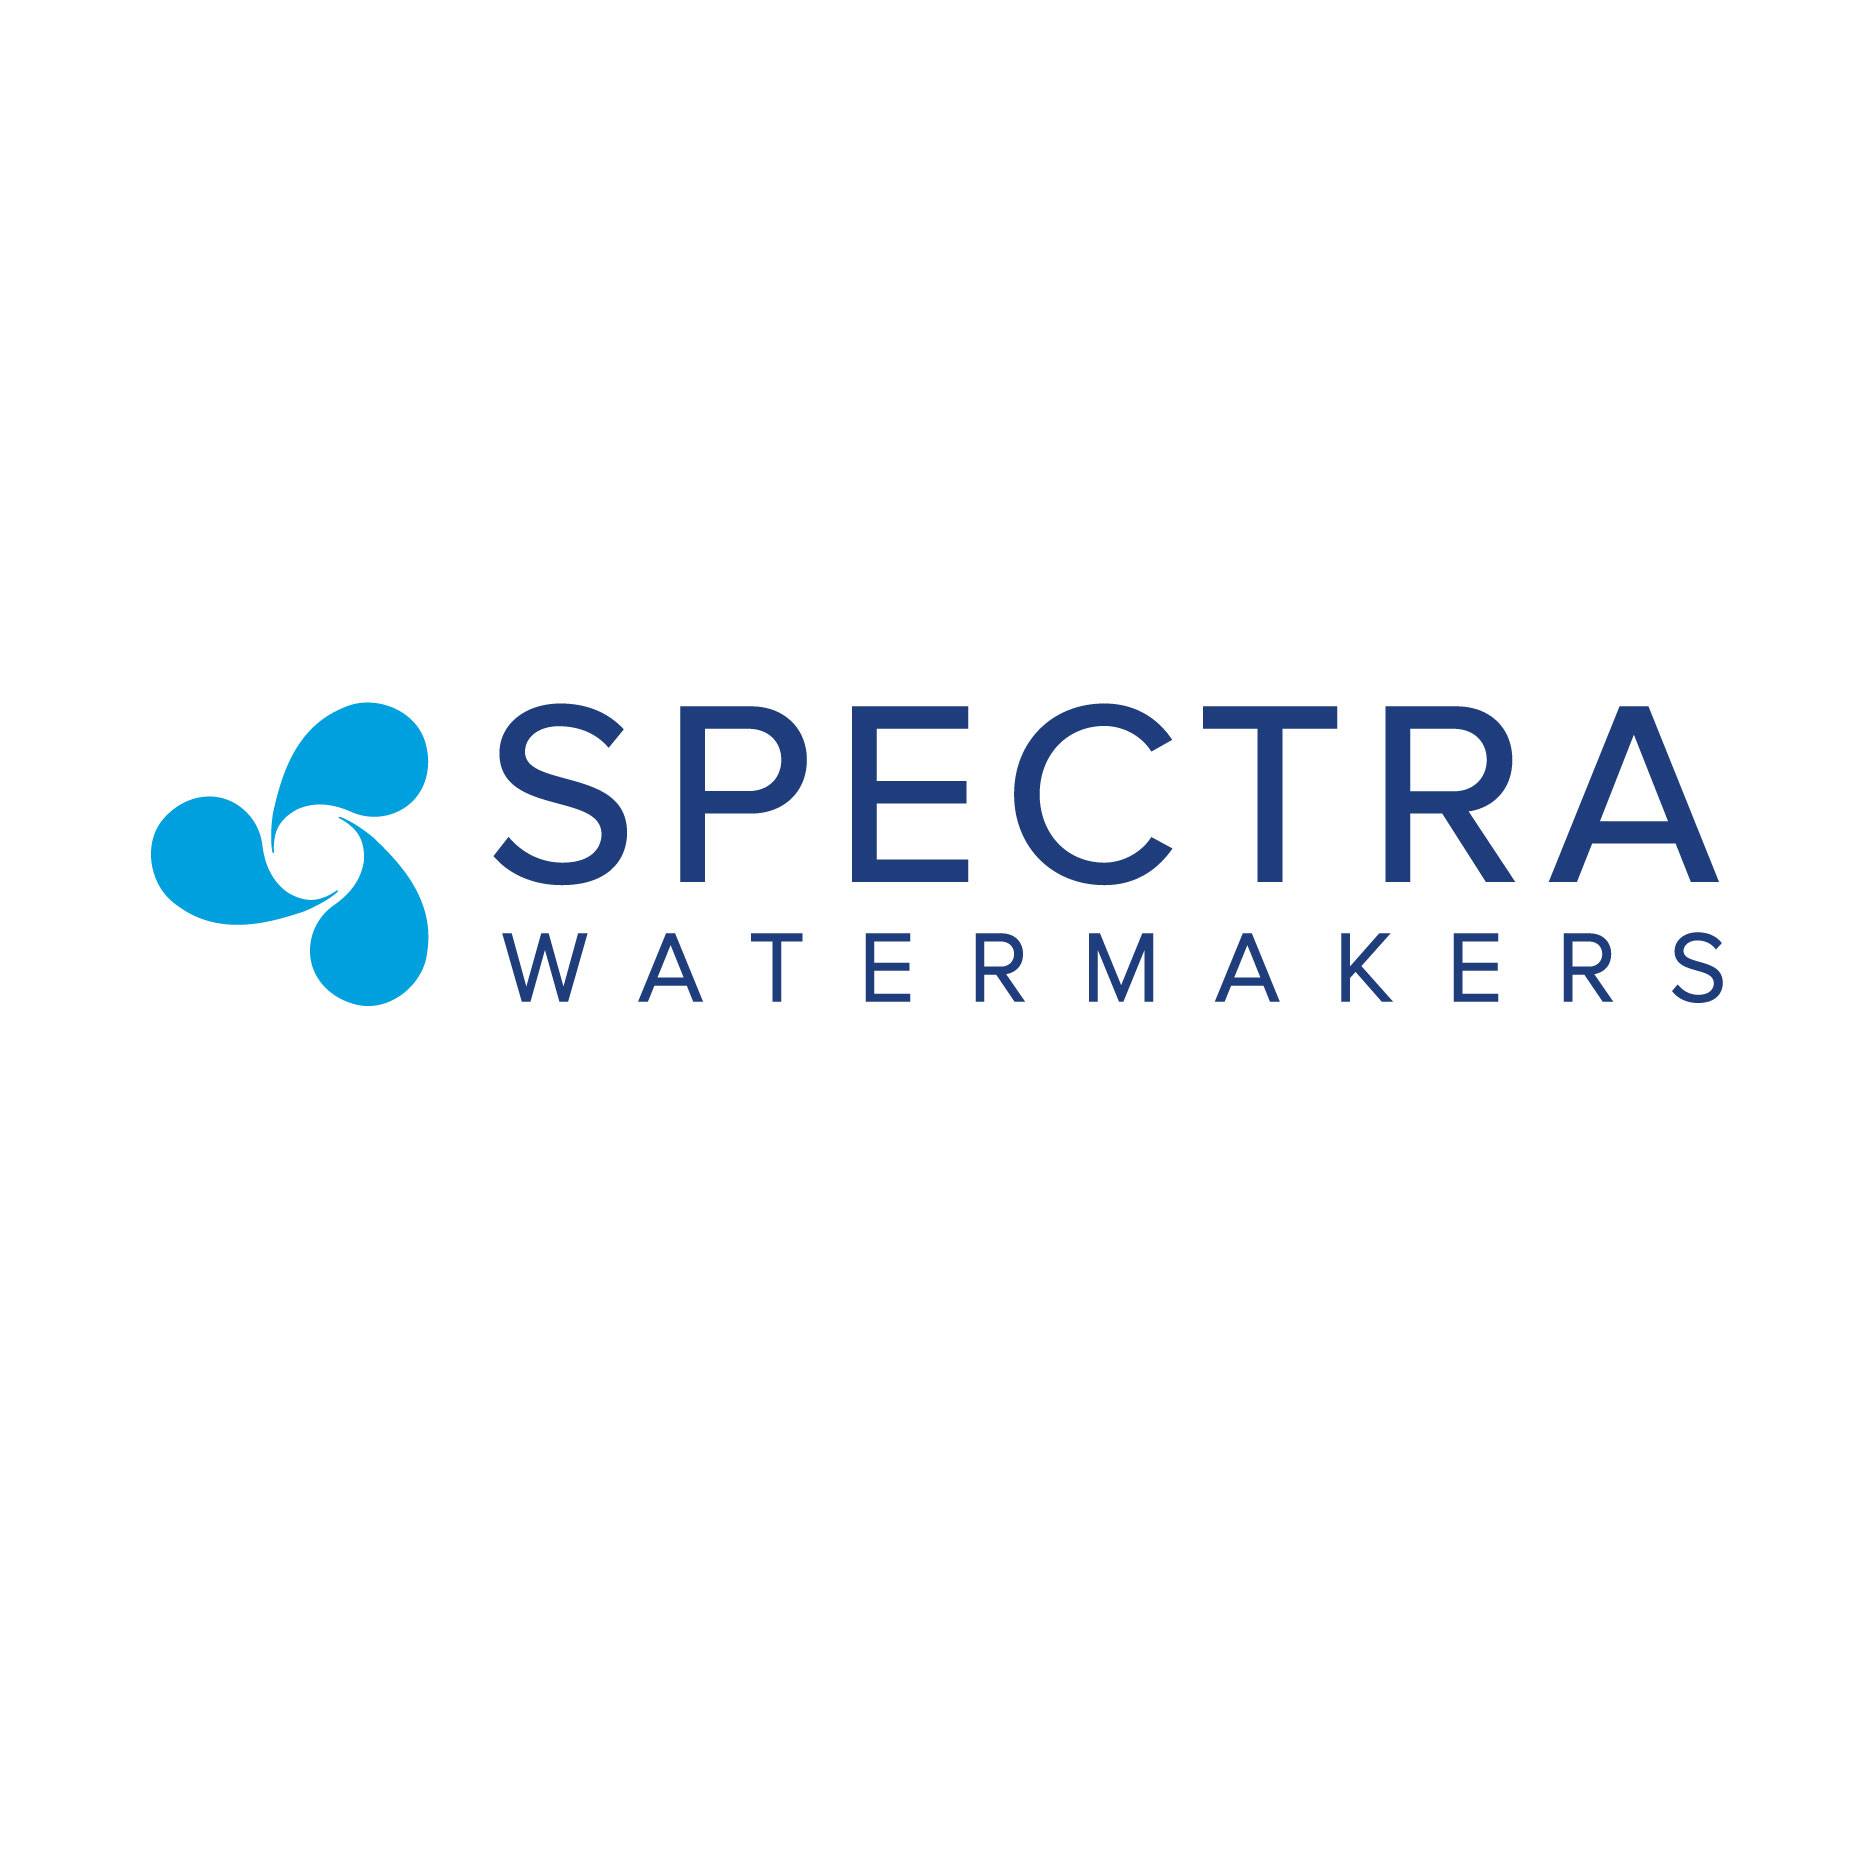 SPECTRA WATERMAKERS, INC. Logo